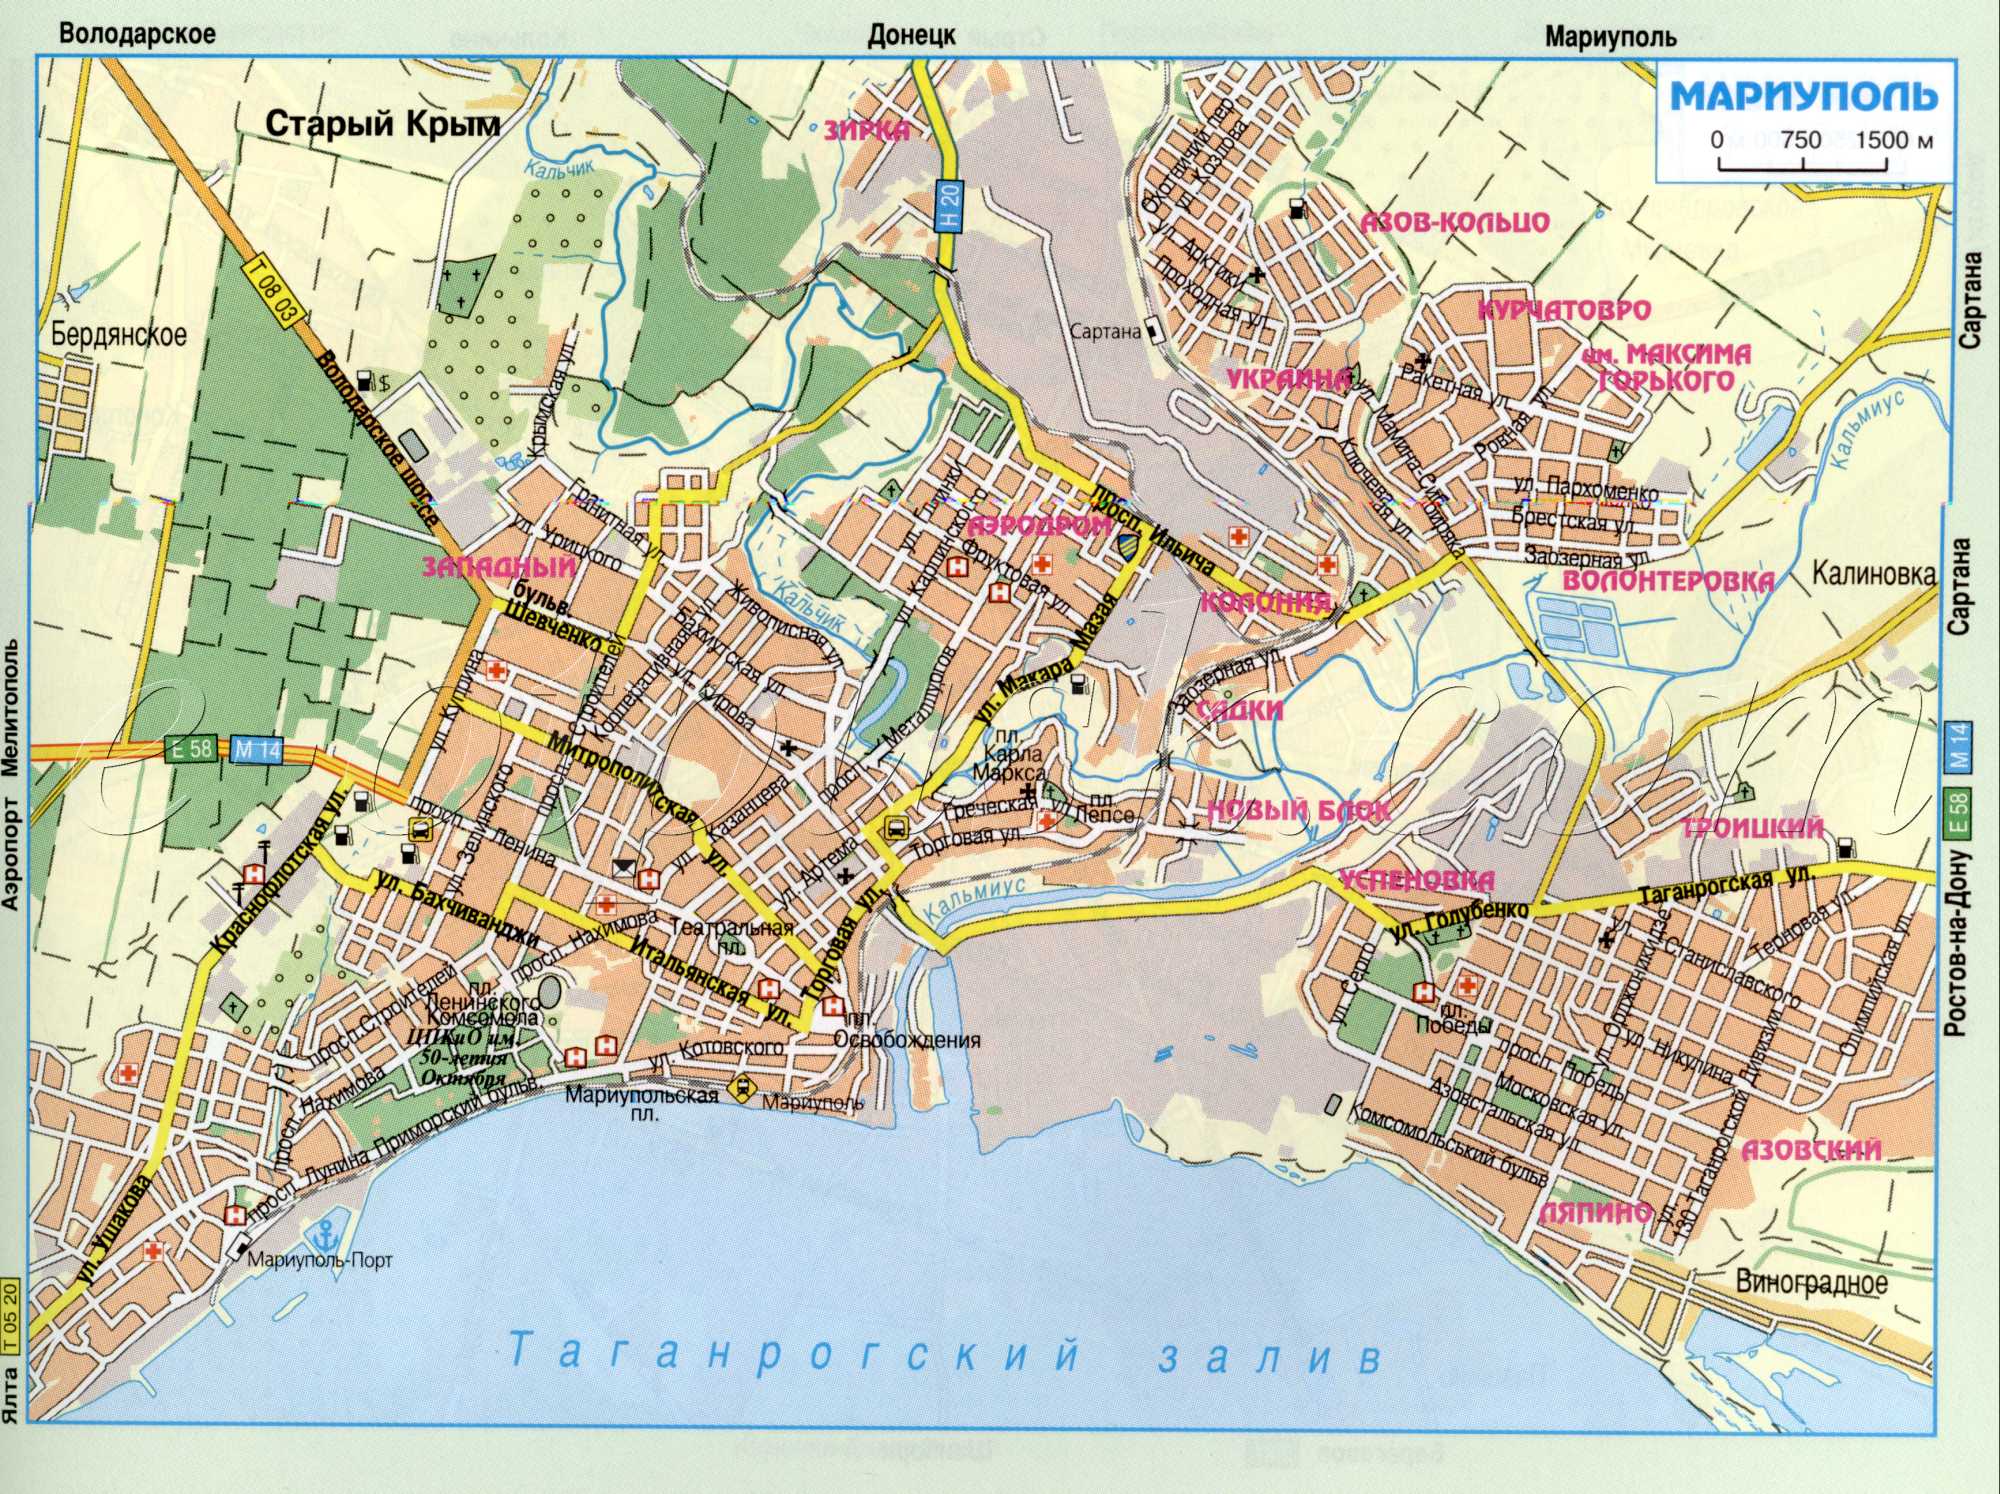 Map of Mariupol (formerly Zhdanov) from the atlas of highways. The scheme of transit passage through Mariupol of the Donetsk region. download for free